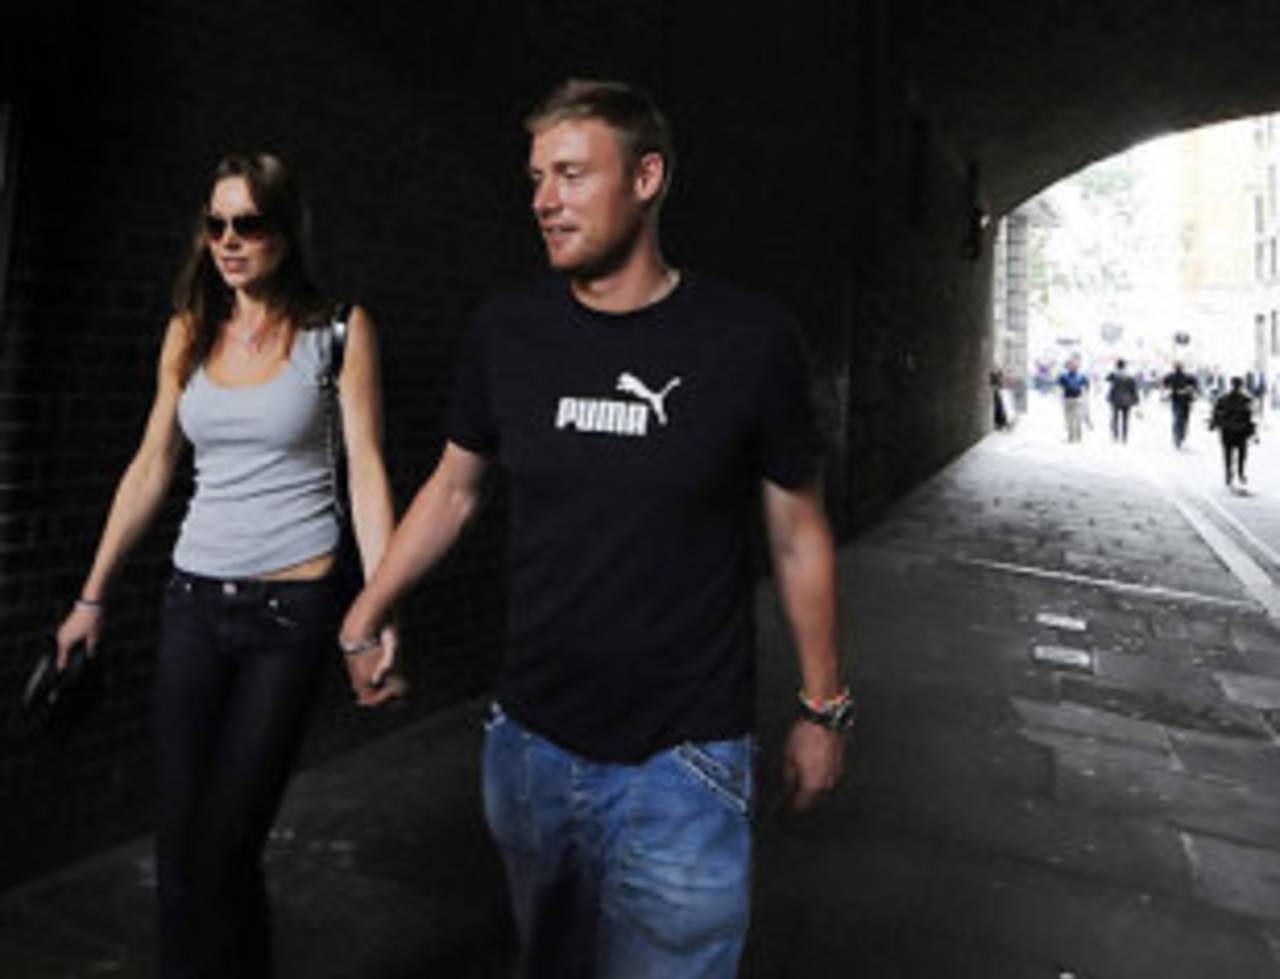 Andrew Flintoff and wife Rachael walk through the streets, London, August 24, 2009